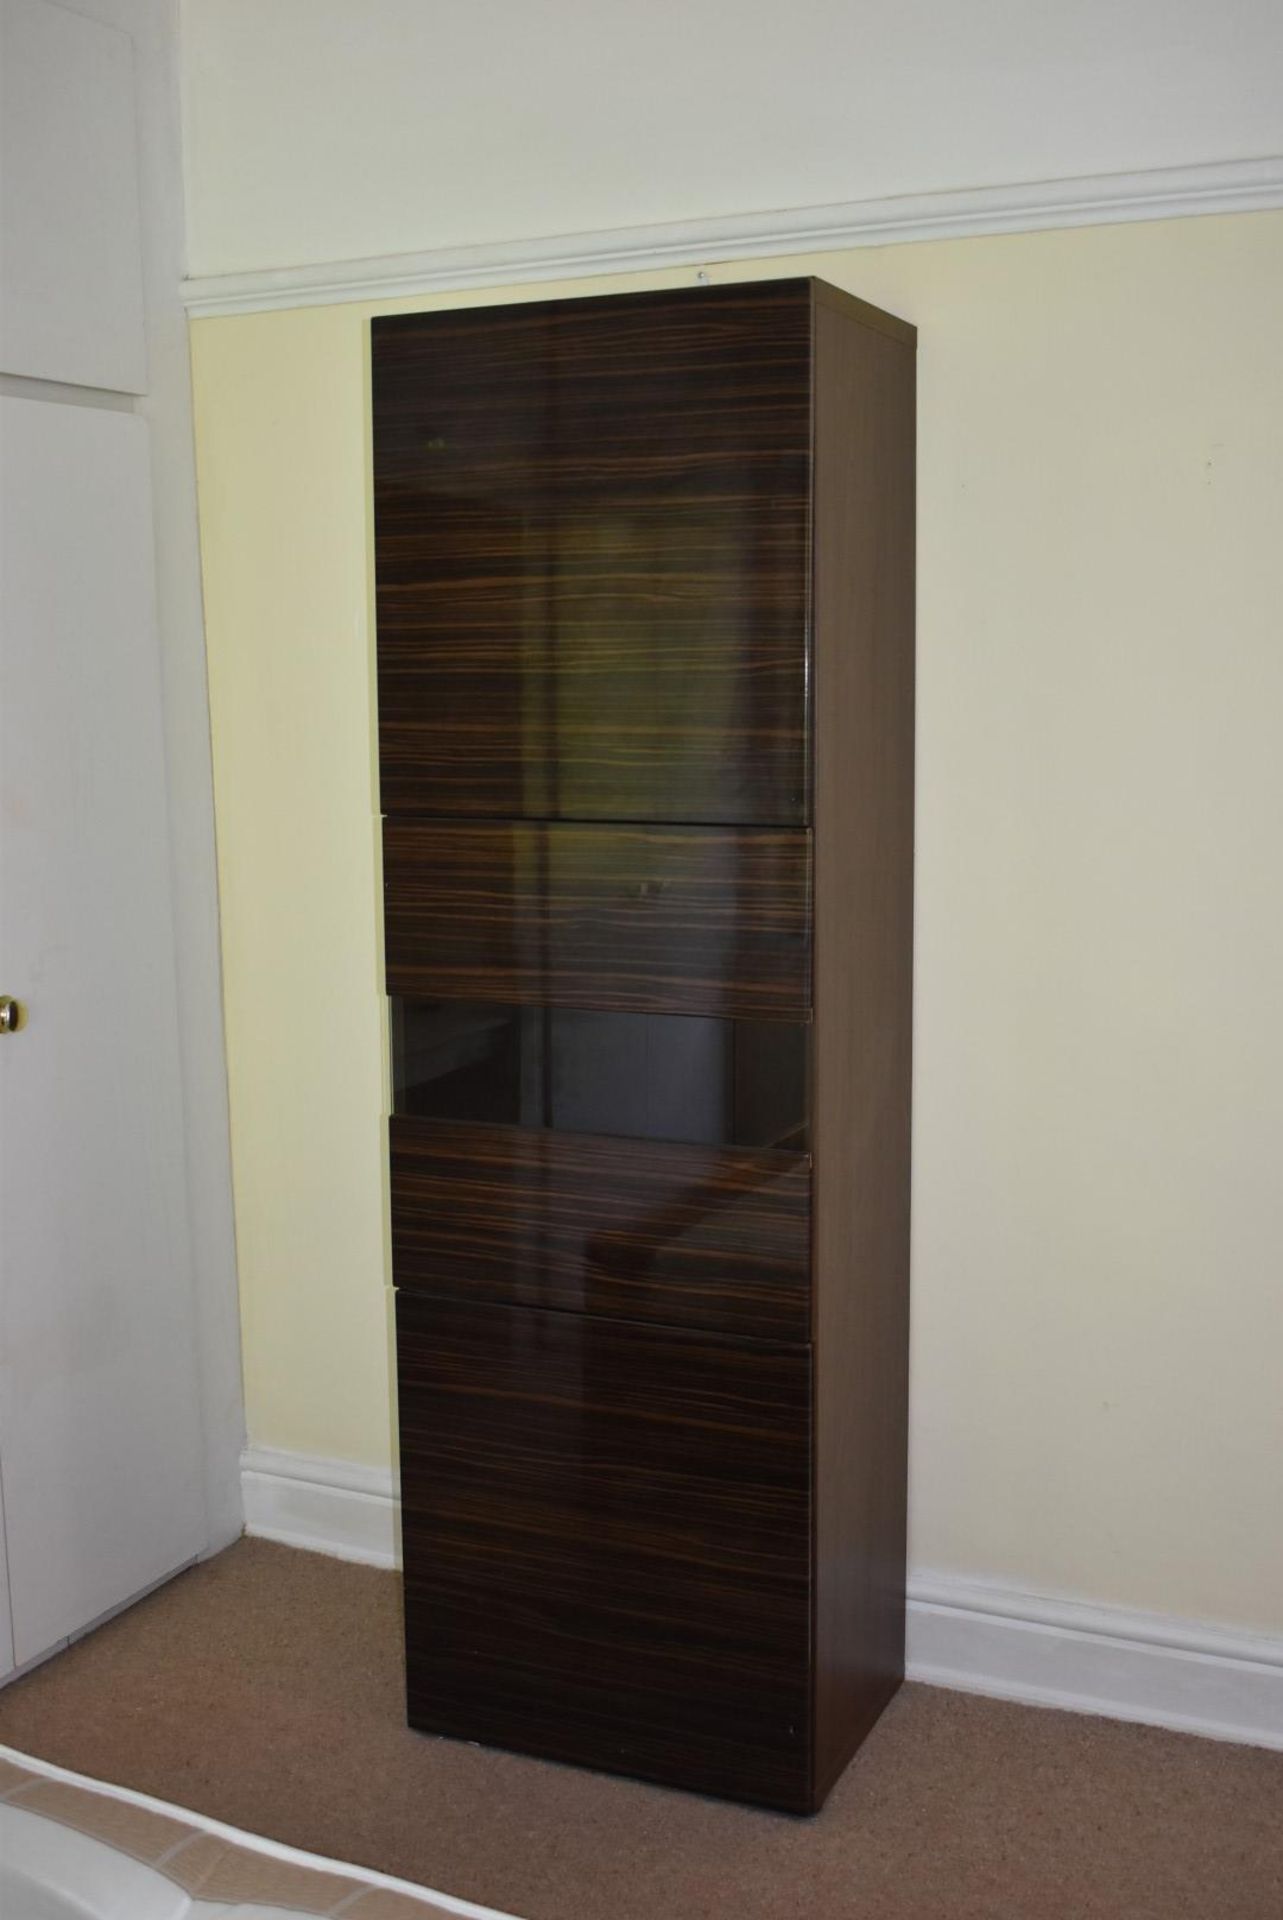 1 x Upright Storage Cabinet With Zebrano Wood Doors - No VAT On The Hammer - CL999 - Location: